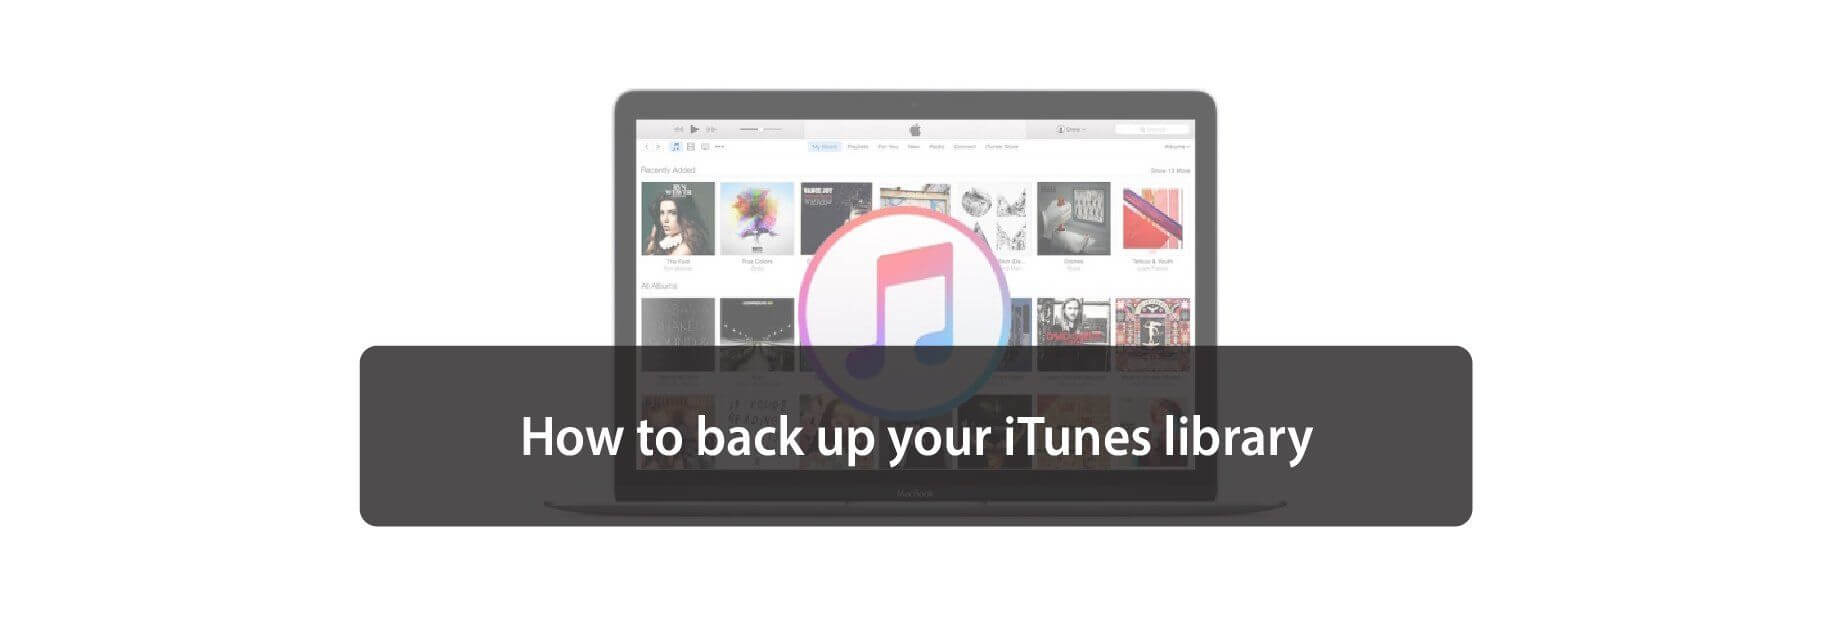 How to back up your iTunes library